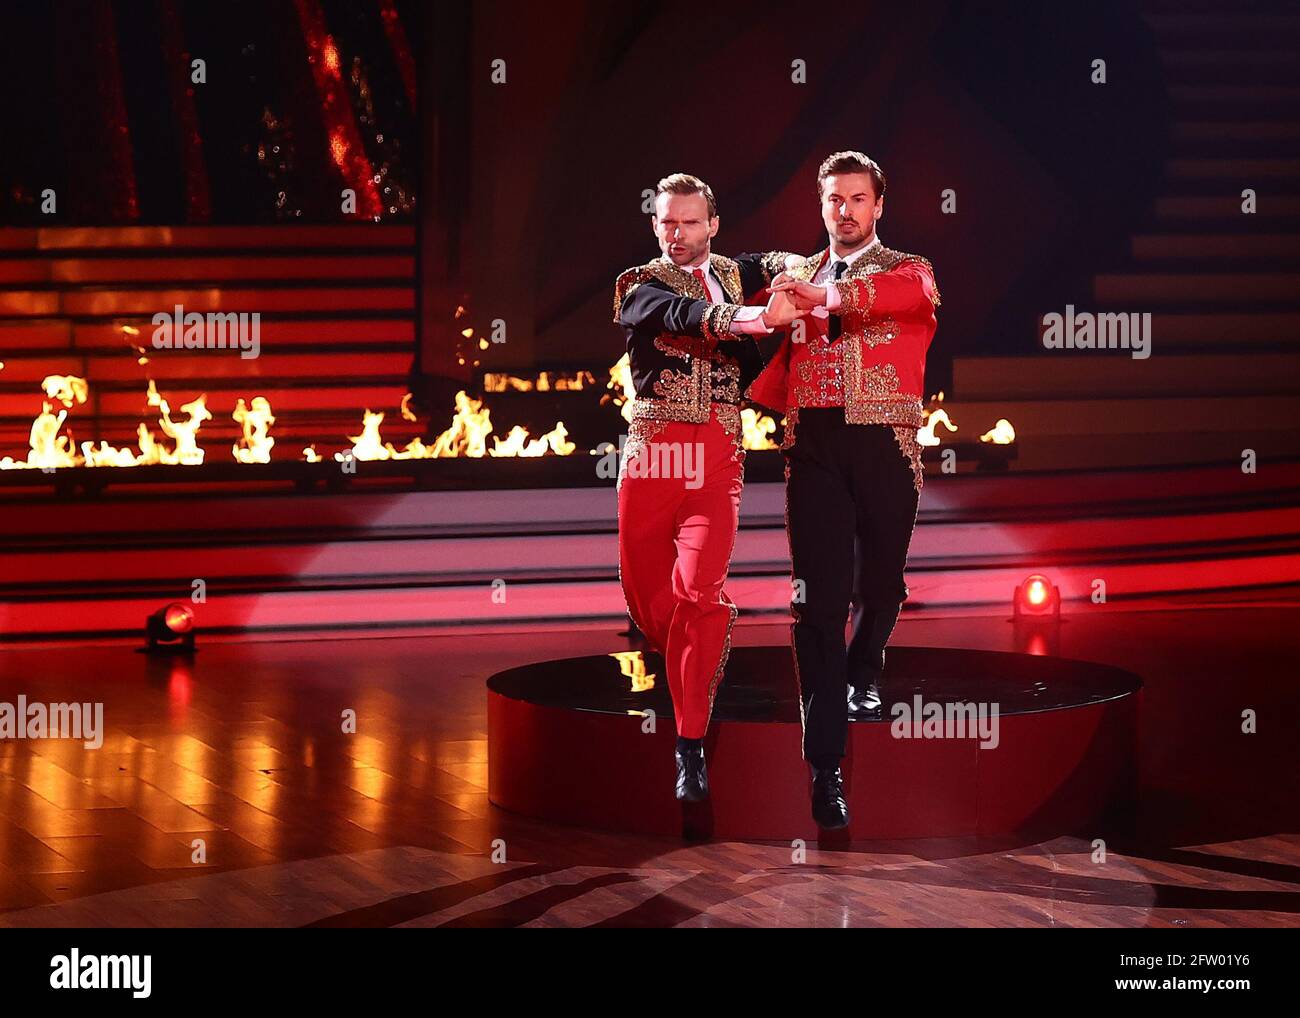 Cologne, Germany. 21st May, 2021. TV actor Nicolas Puschmann and professional dancer Vadim Garbuzov (l) dance a Paso Doble on the RTL dance show 'Let's Dance'. Credit: Rolf Vennenbernd/dpa-Pool/dpa/Alamy Live News Stock Photo